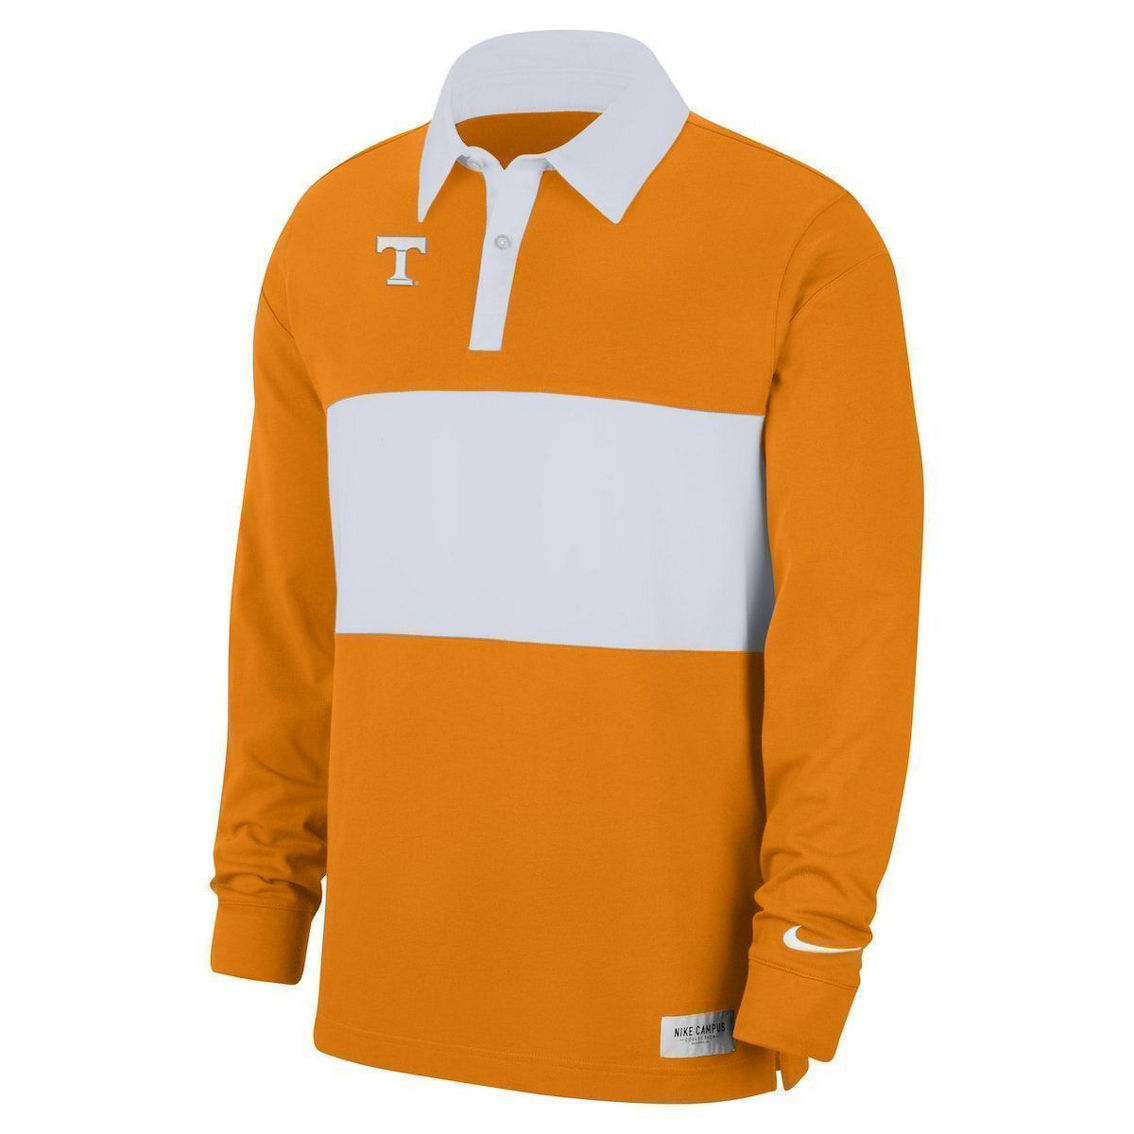 Nike Men's Tennessee Orange Tennessee Volunteers Striped Long Sleeve Polo - Image 3 of 4